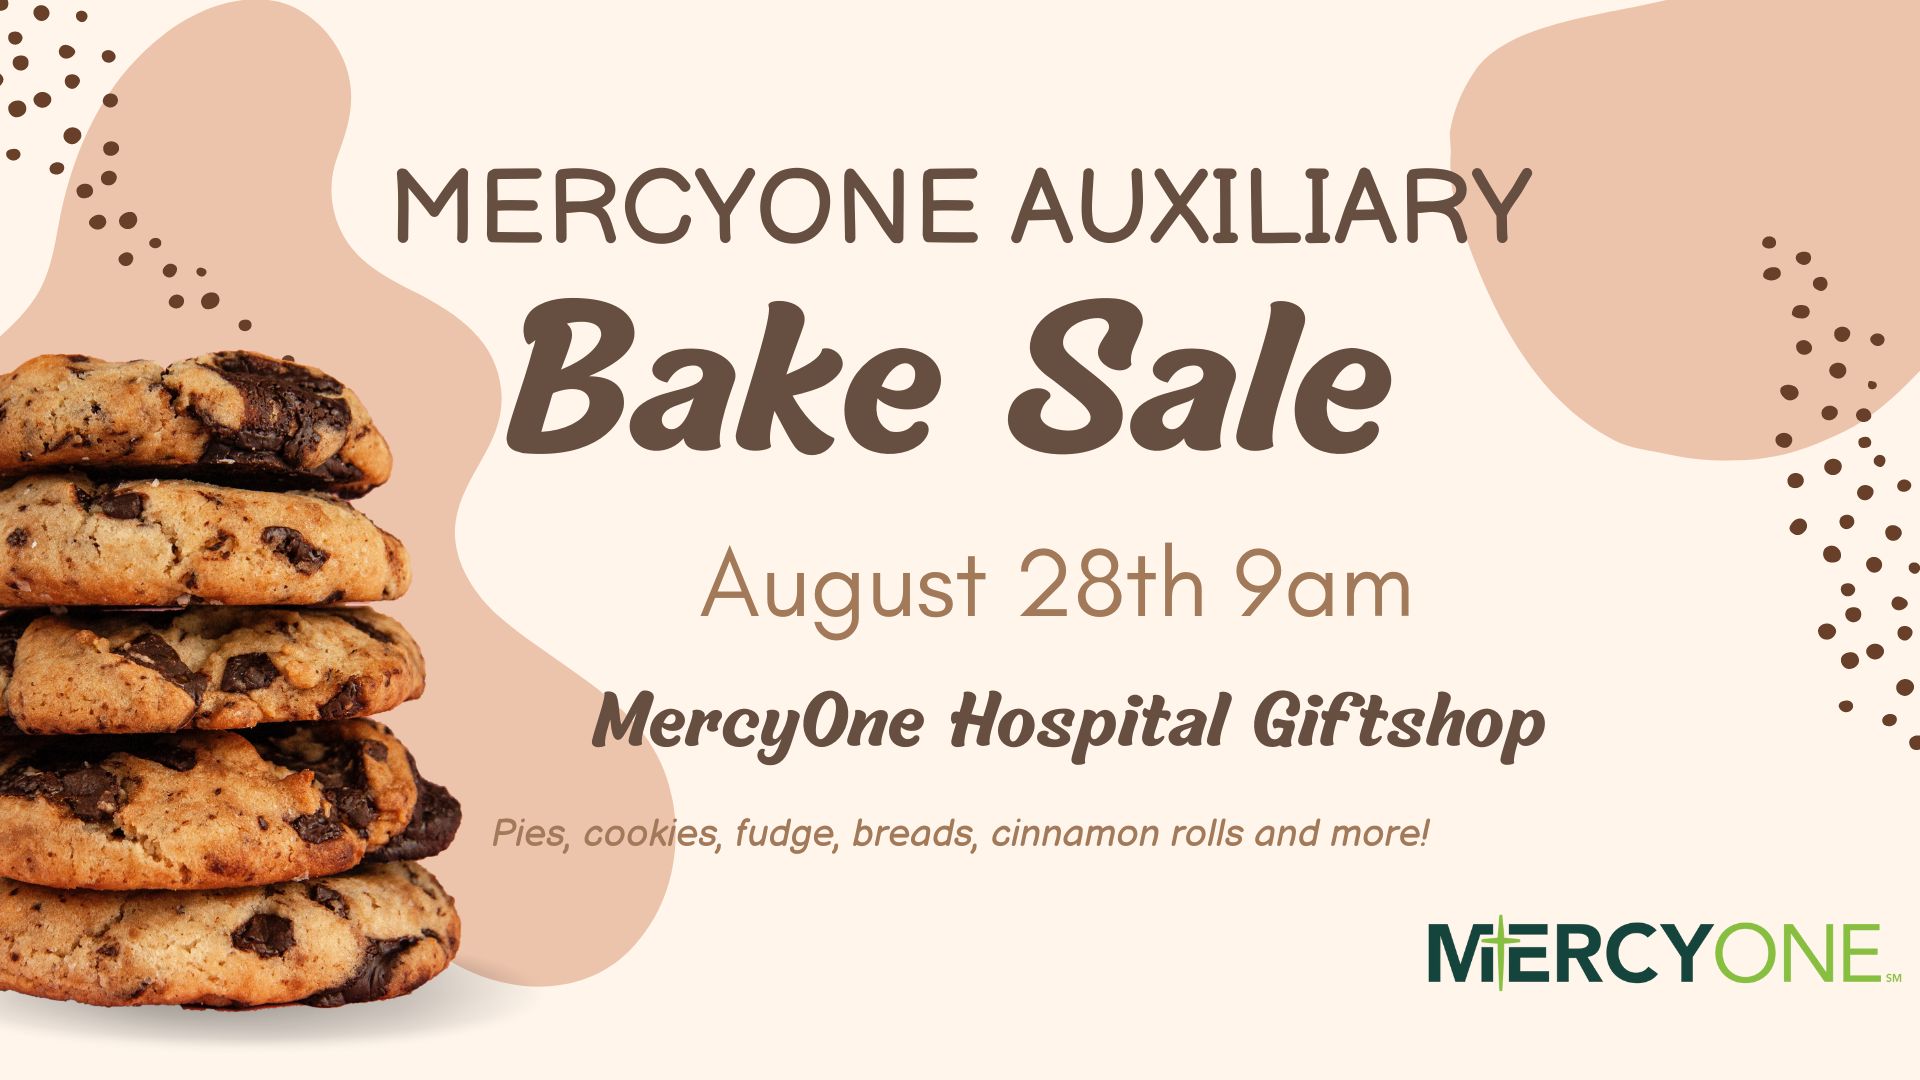 MercyOne Auxiliary Bake Sale August 28th